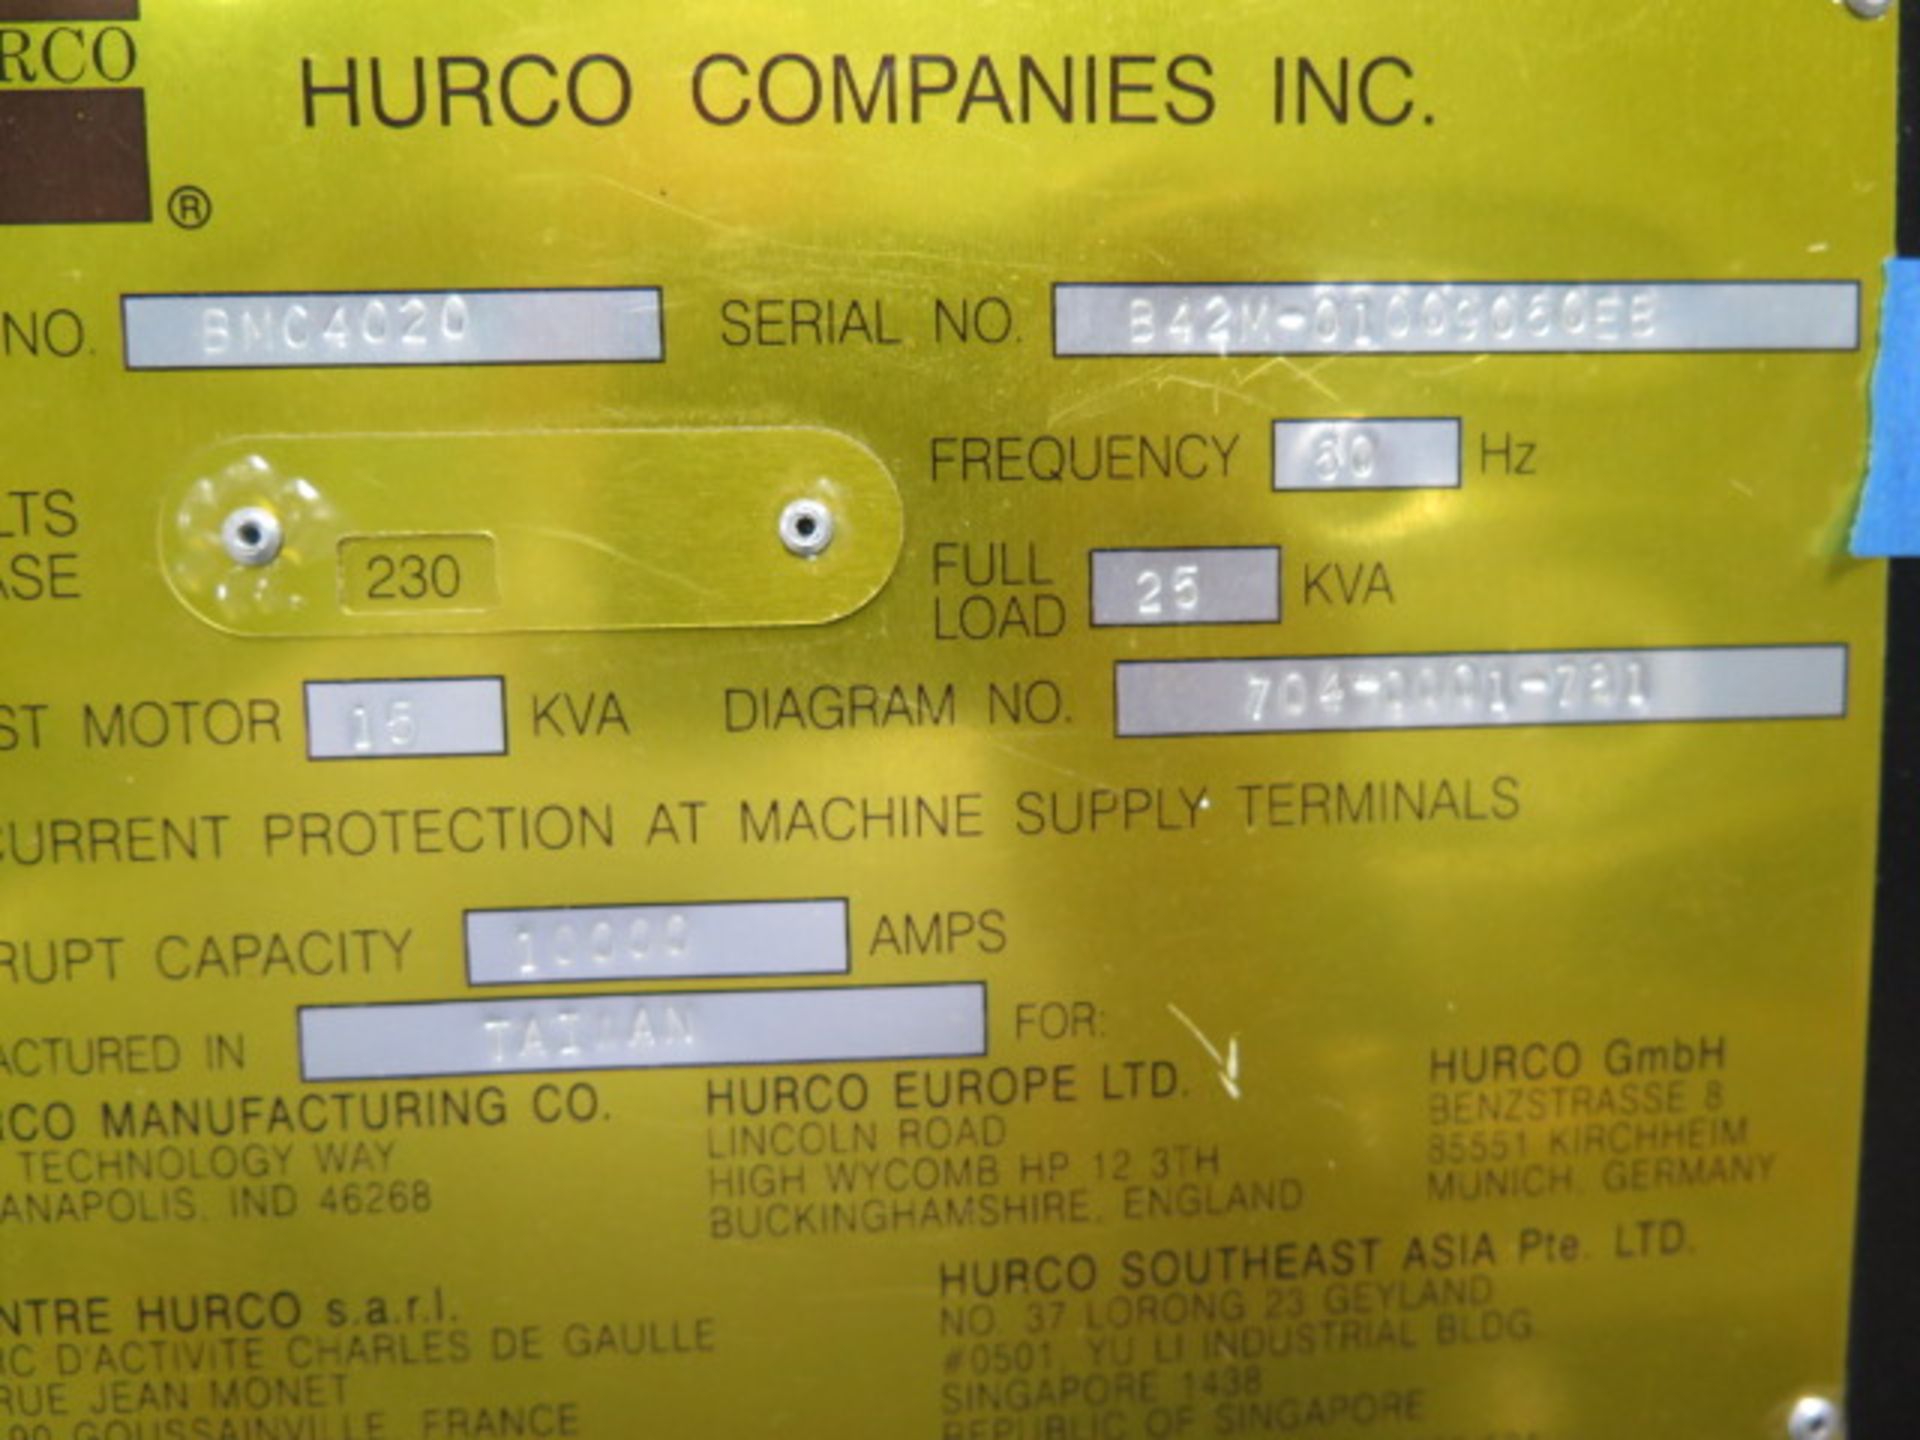 2000 Hurco BMC4020 CNC VMC, s/n B42M-01009060EB w/ Ultimax CNC Controls, Sold AS IS with NO Waranty - Image 12 of 13